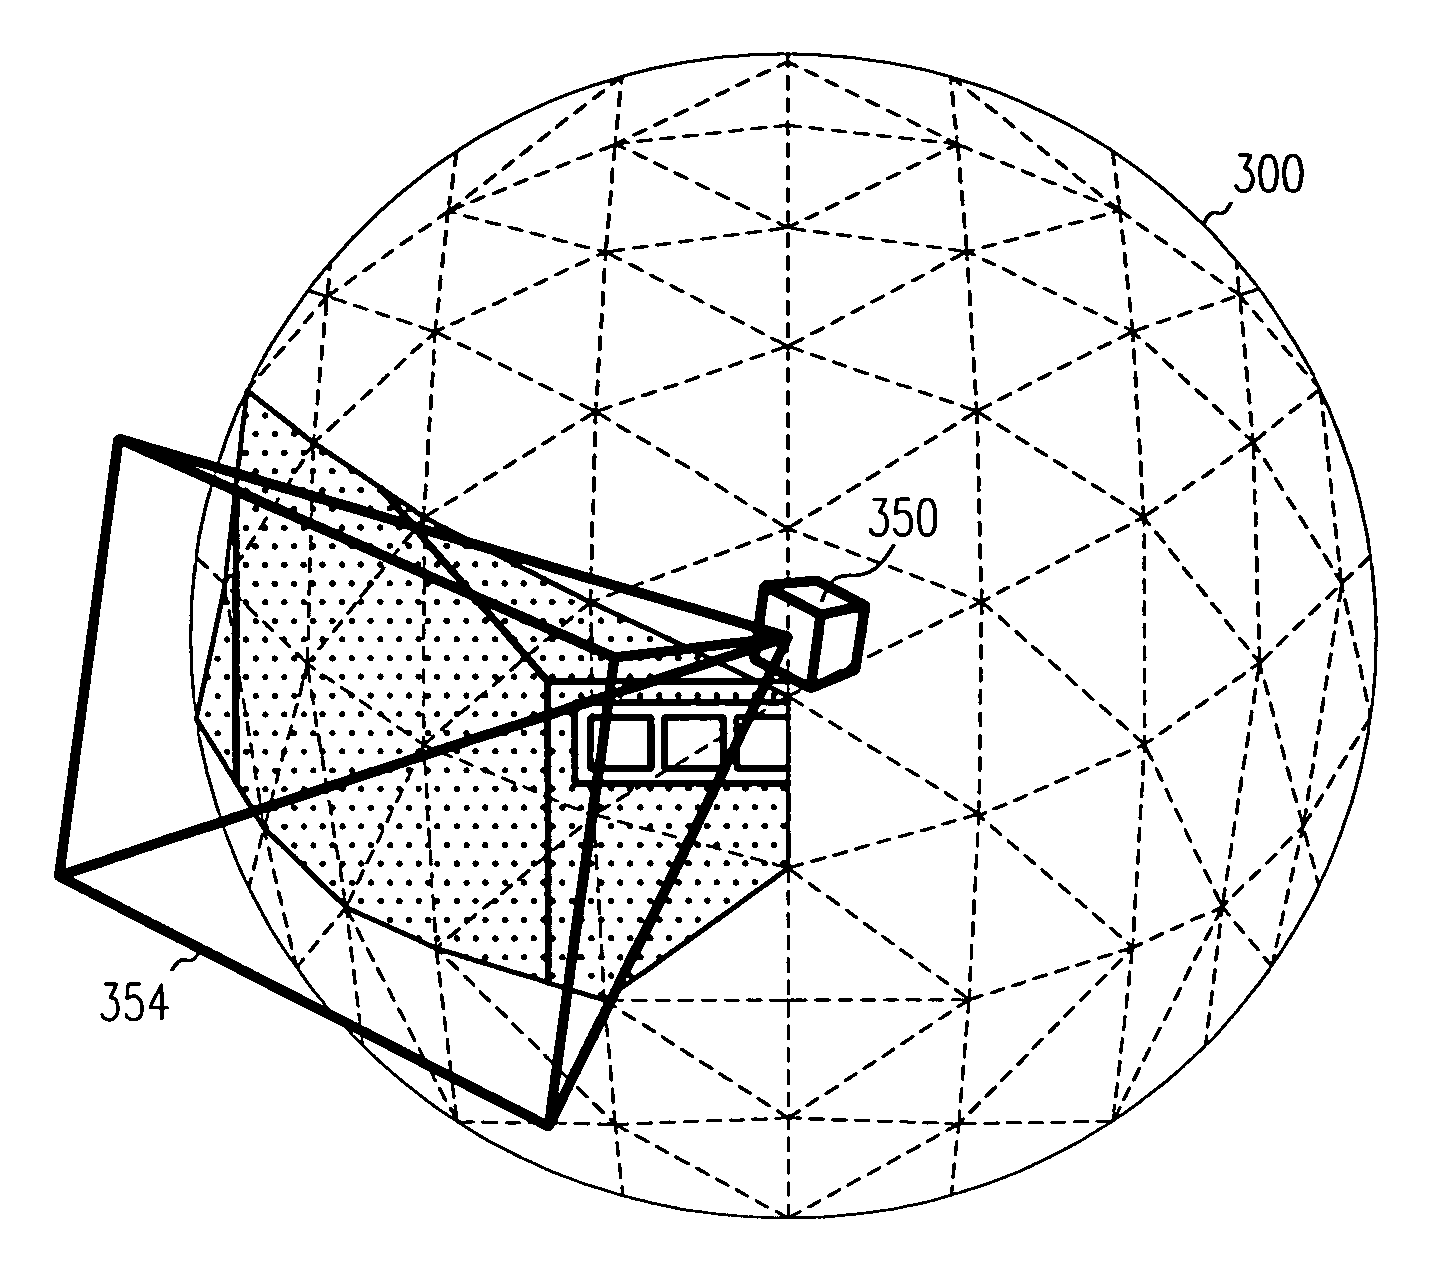 Image processing and display